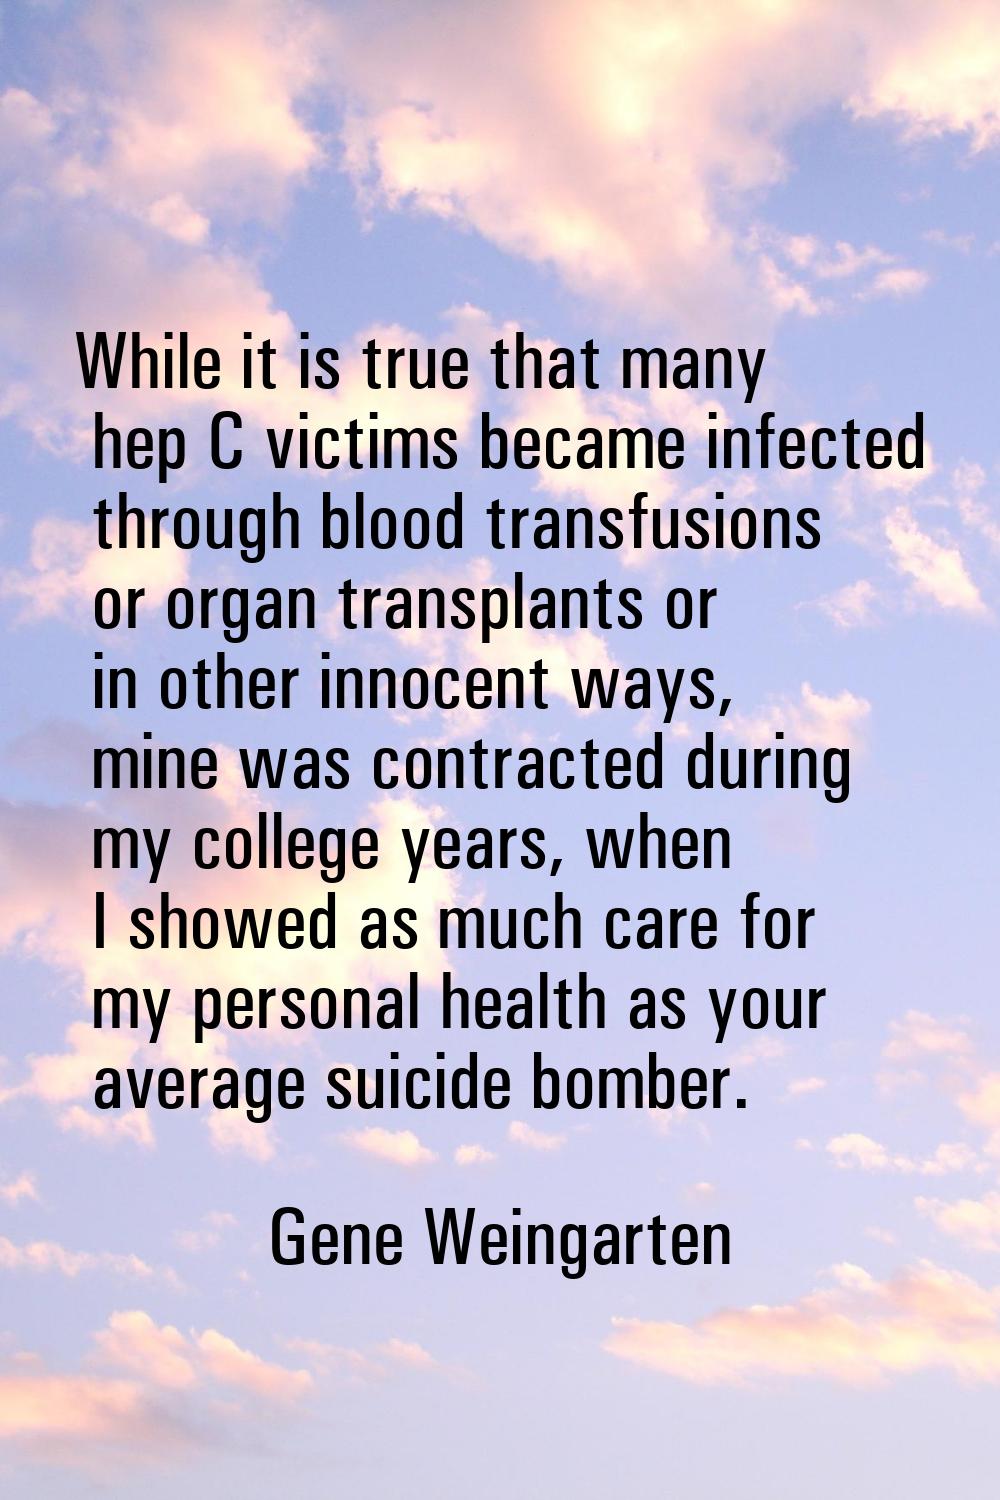 While it is true that many hep C victims became infected through blood transfusions or organ transp